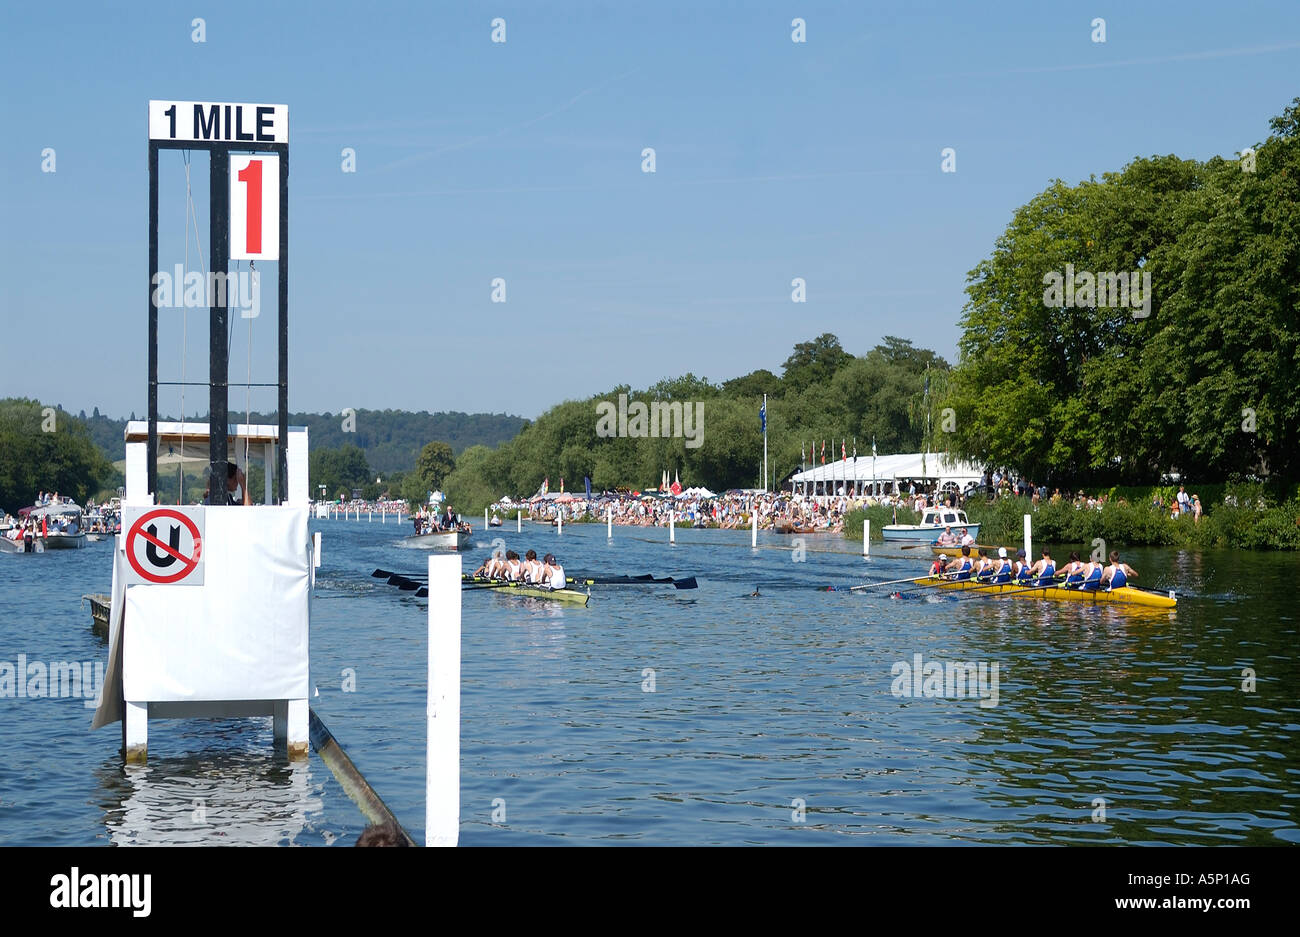 Eights racing neck and neck at the the 1 mile mark at   the Henley Royal Regatta Stock Photo